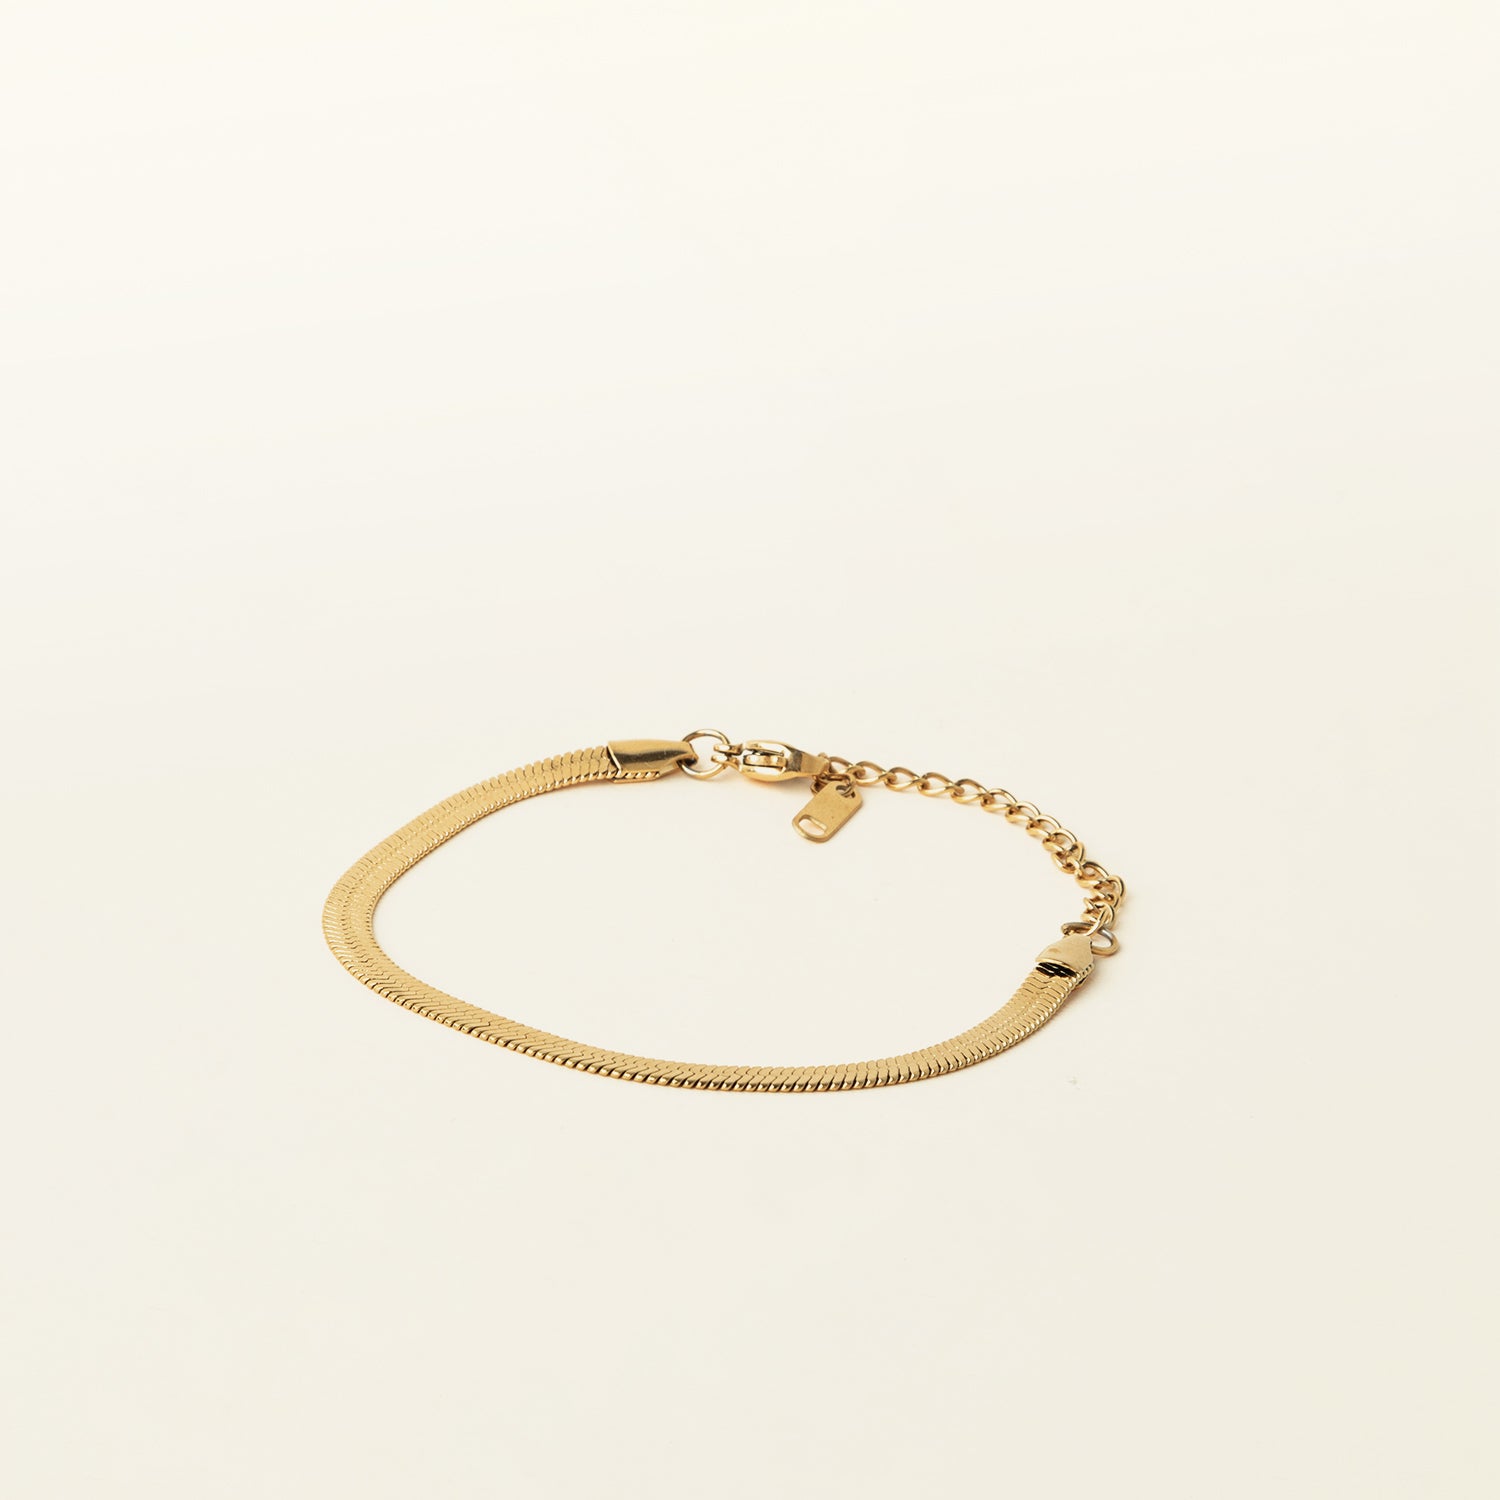 Image of the Herringbone Chain Bracelet is crafted with 18K Gold Plated on 316L Stainless Steel, making it non-tarnish, water resistant, nickel-free, and hypoallergenic. It has an adjustable feature, but it is sold as a single bracelet.